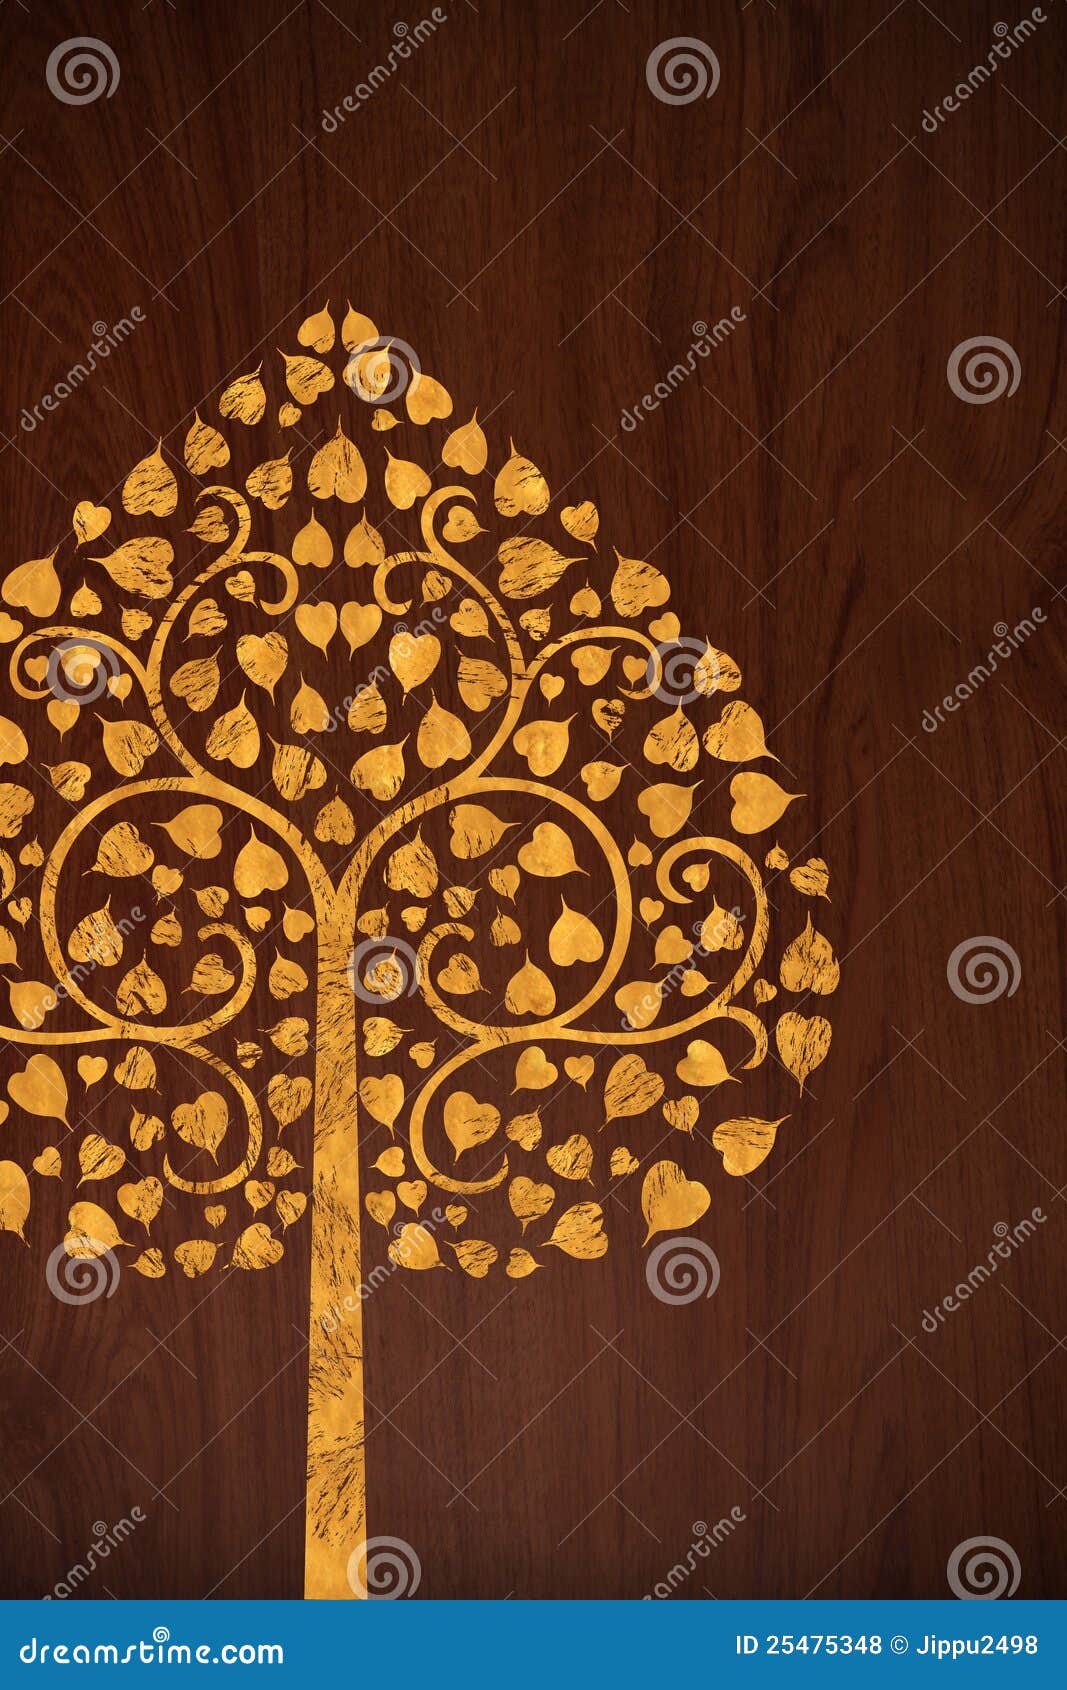 pattern carve gold tree on wood texture